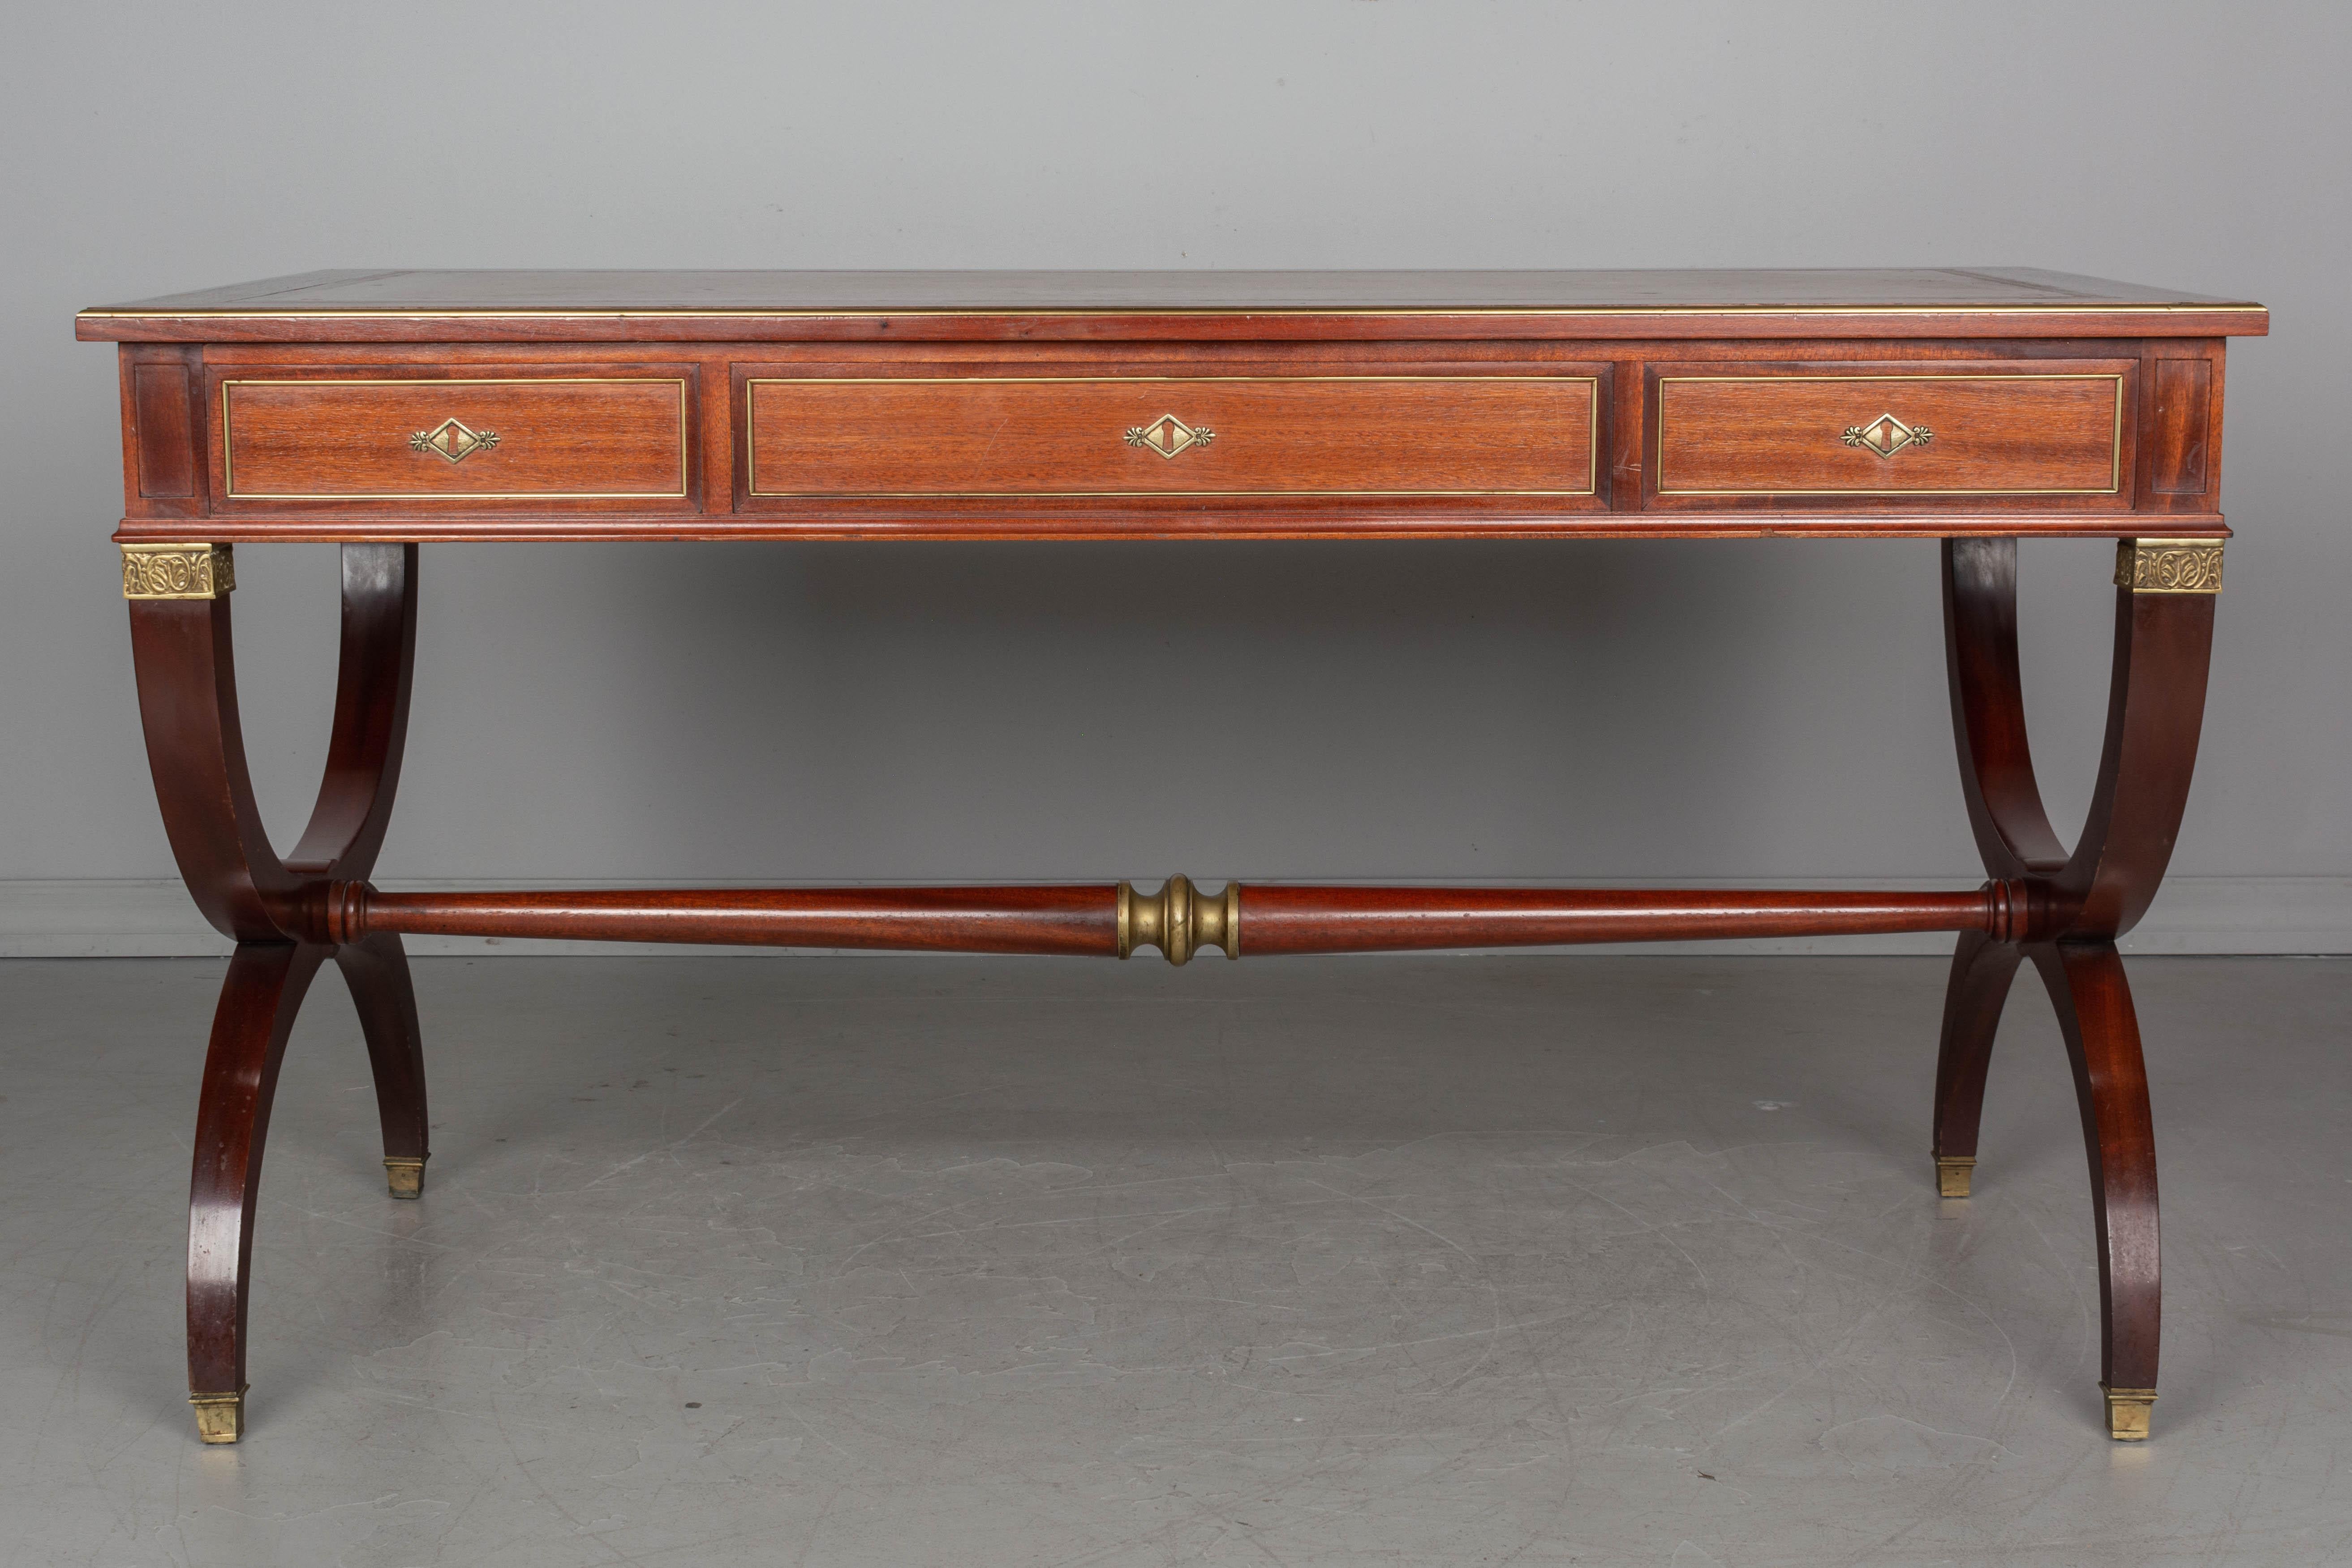 20th Century French Empire Style Leather Top Mahogany Desk